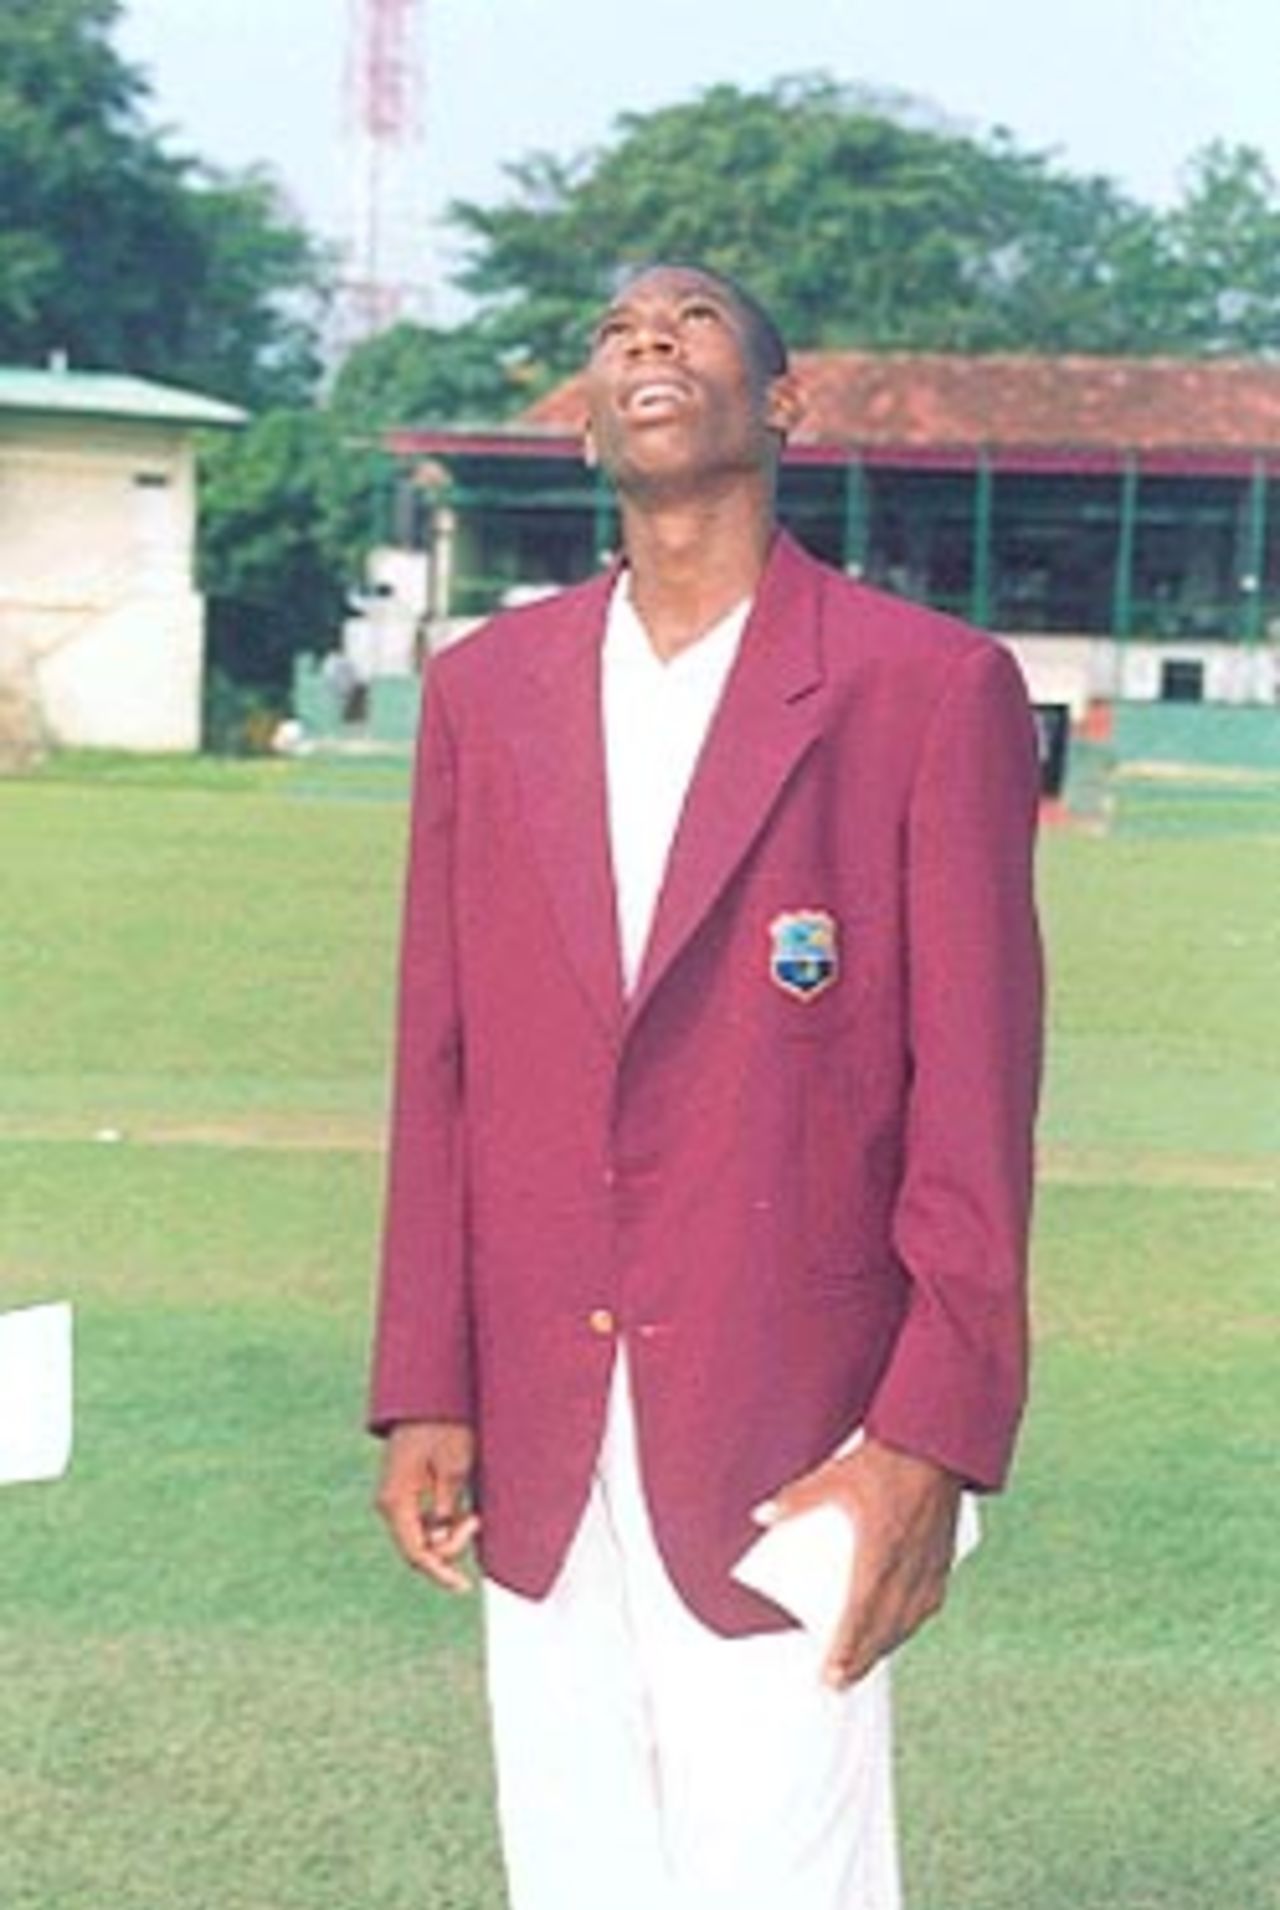 Ryan Hinds looks heavenward and waits to see which way the coin will fall, Under-19s World Cup, 1999/00, Super League Group 1,New Zealand Under-19s v West Indies Under-19s, Nondescripts Cricket Club Ground, Colombo, 20 January 2000